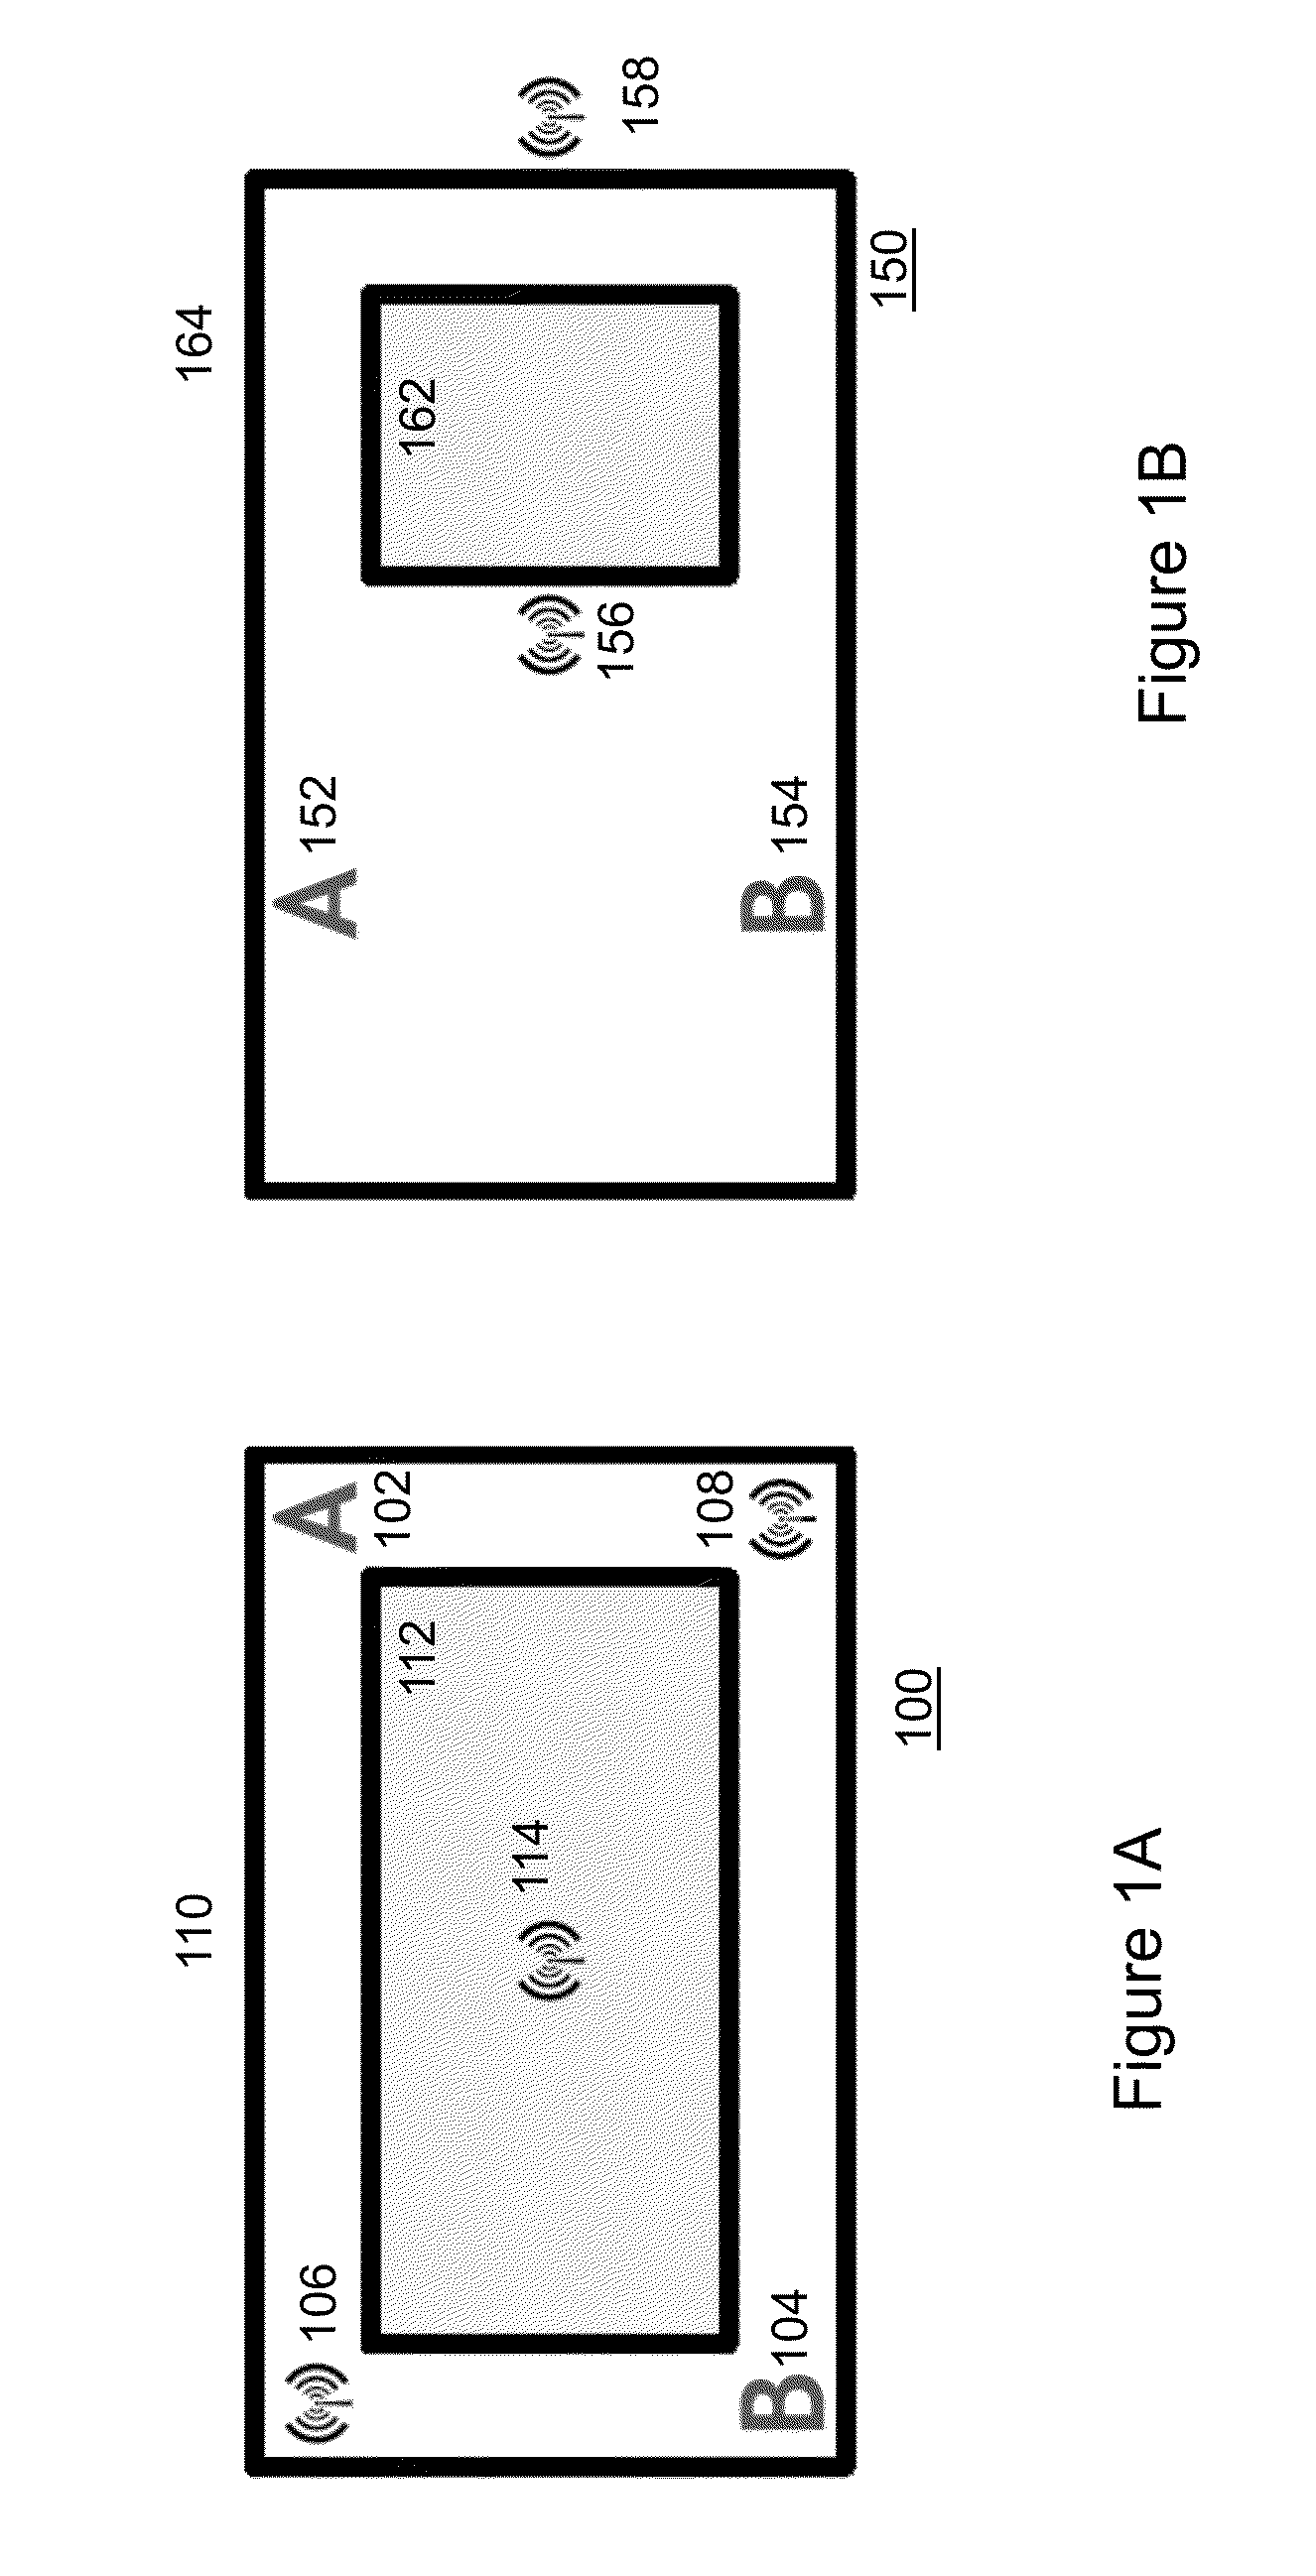 Method and System for Signal-based Localization